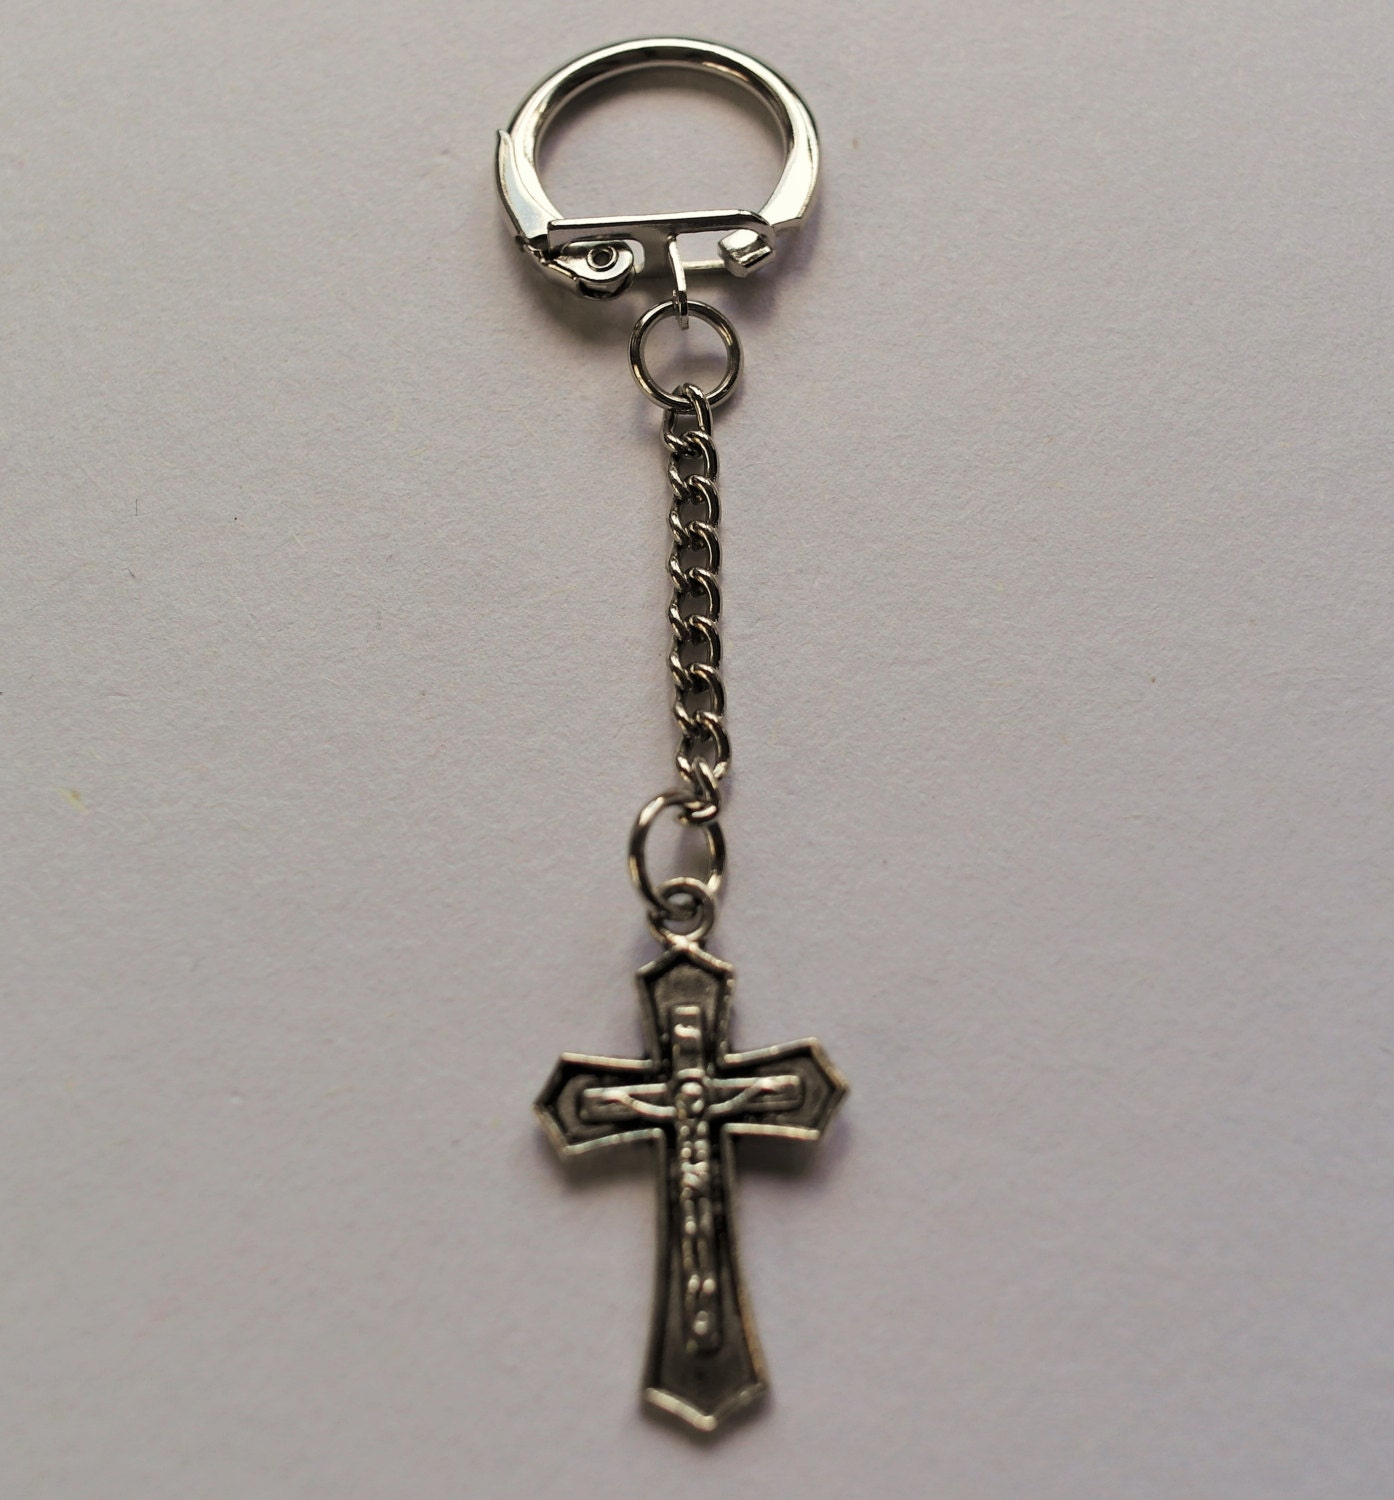 crucifix key ring chain by JosThrift on Etsy